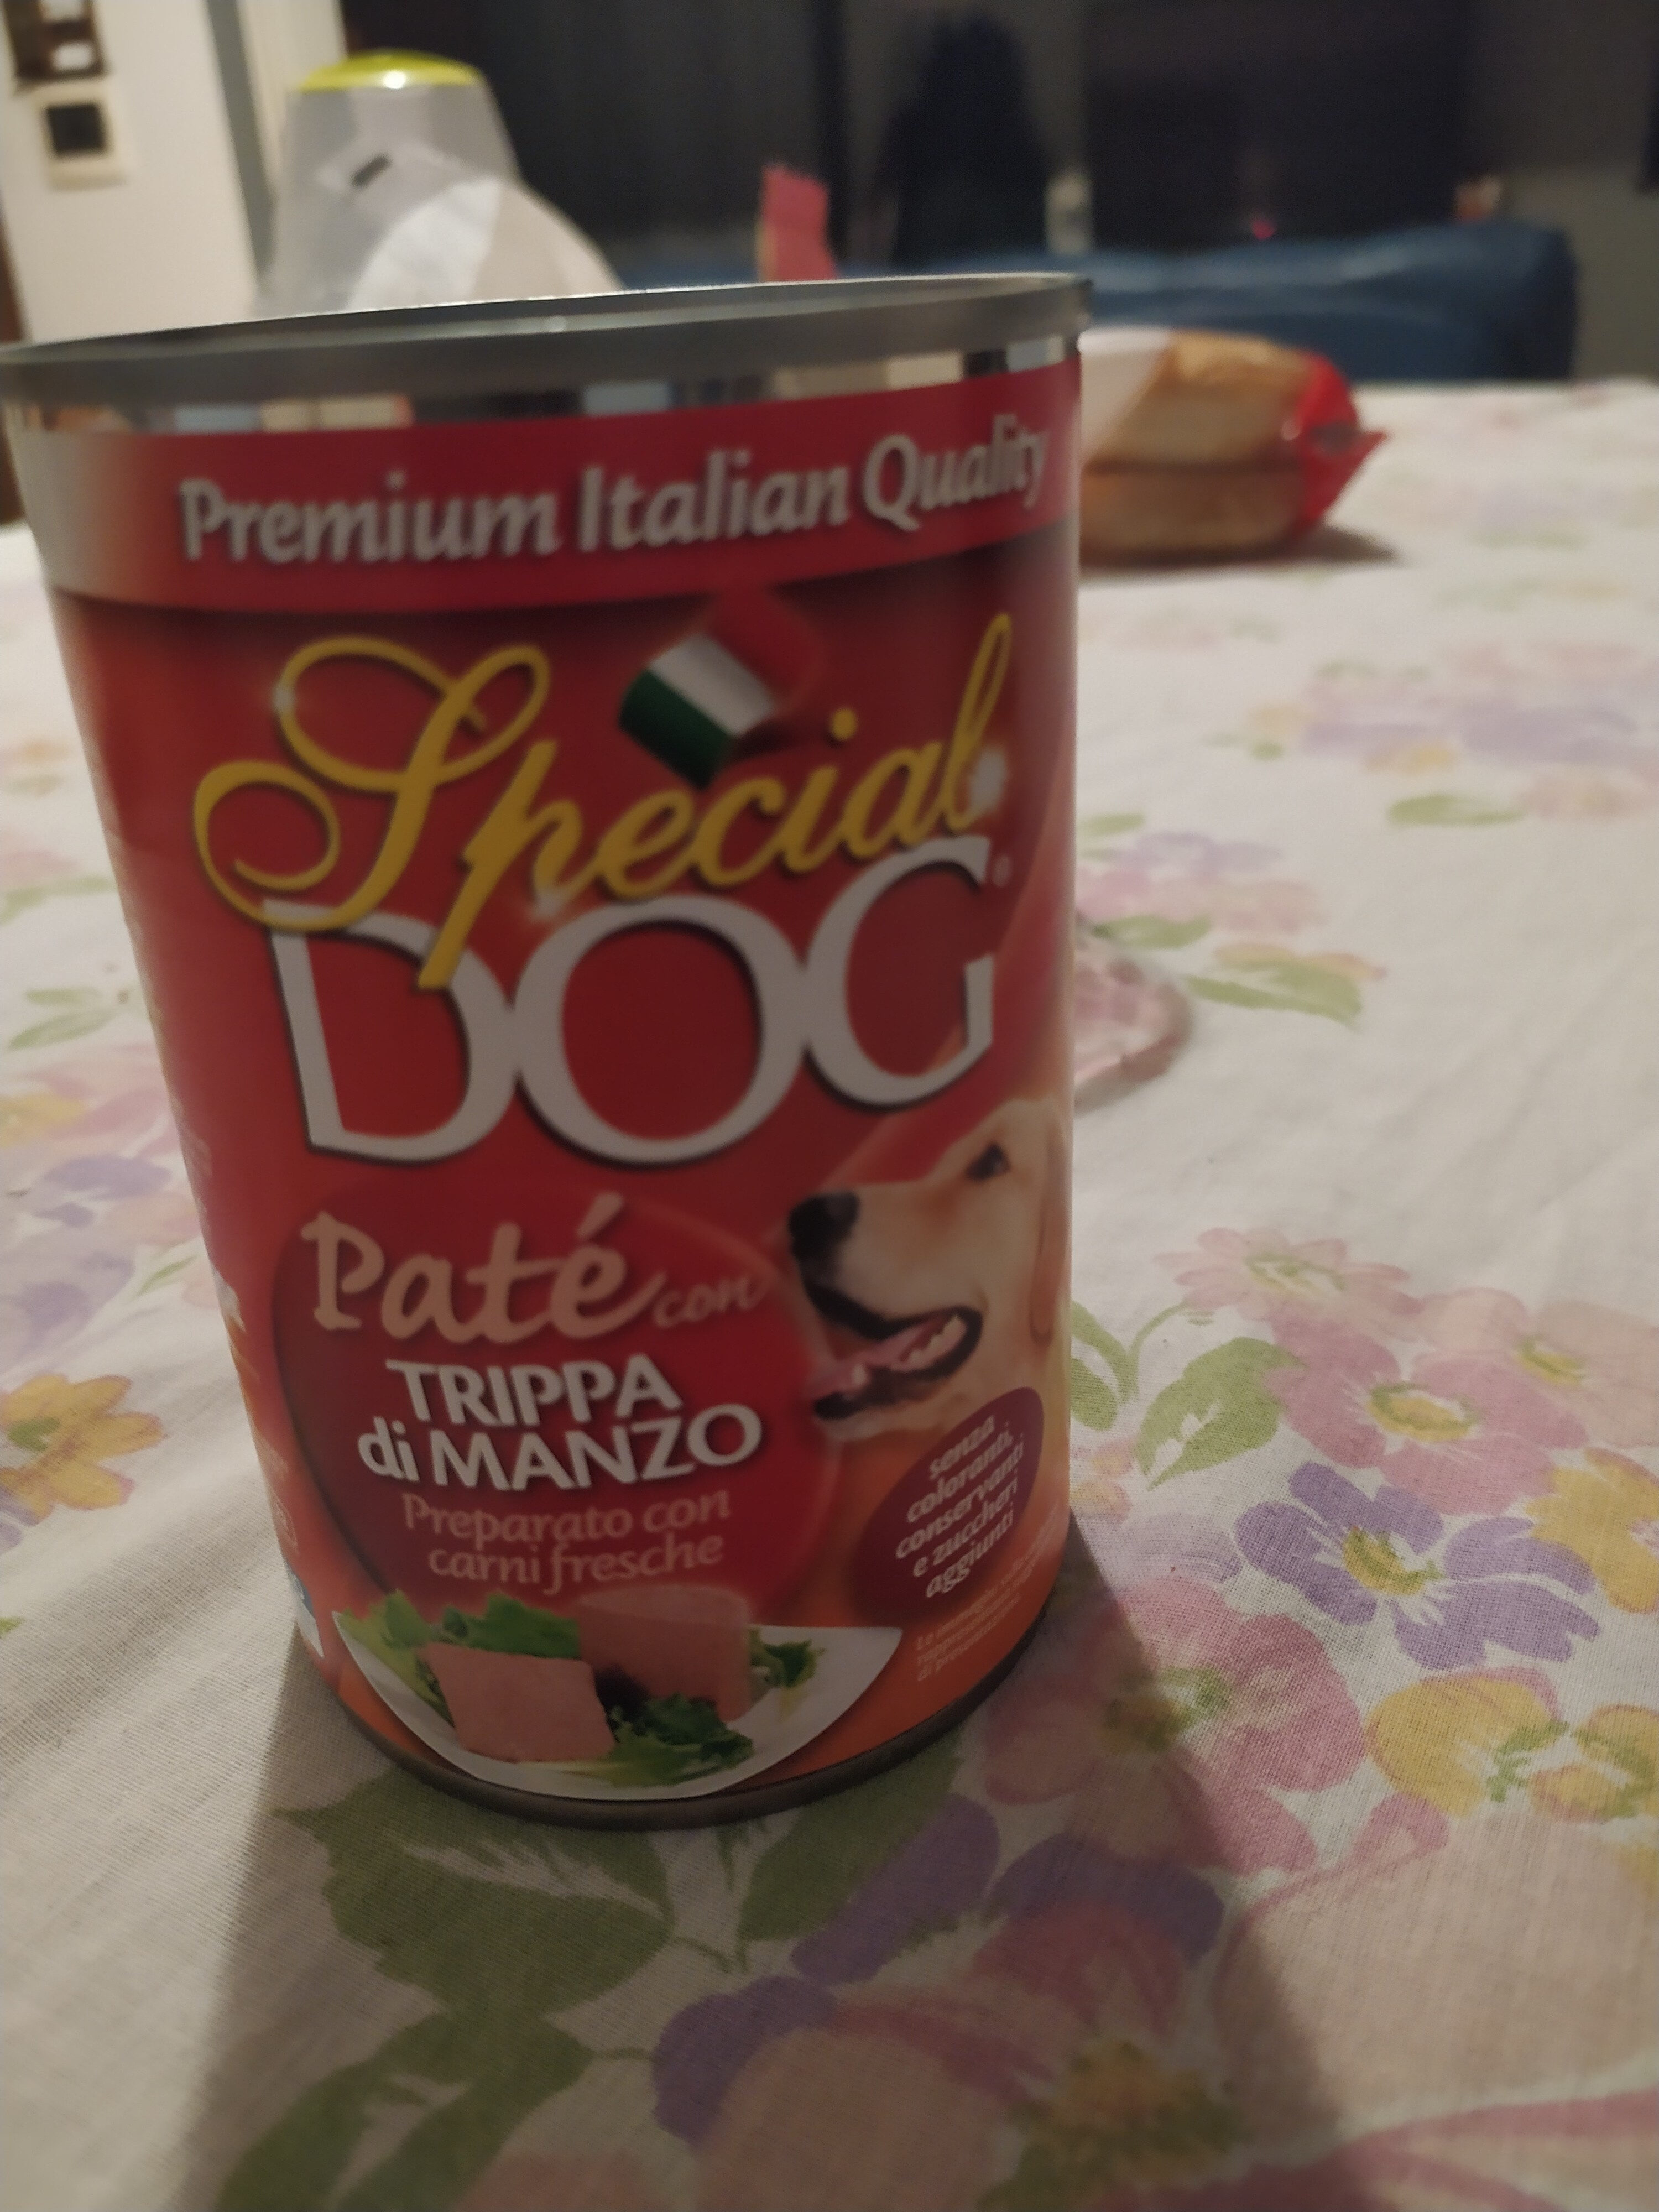 special dog - Product - it